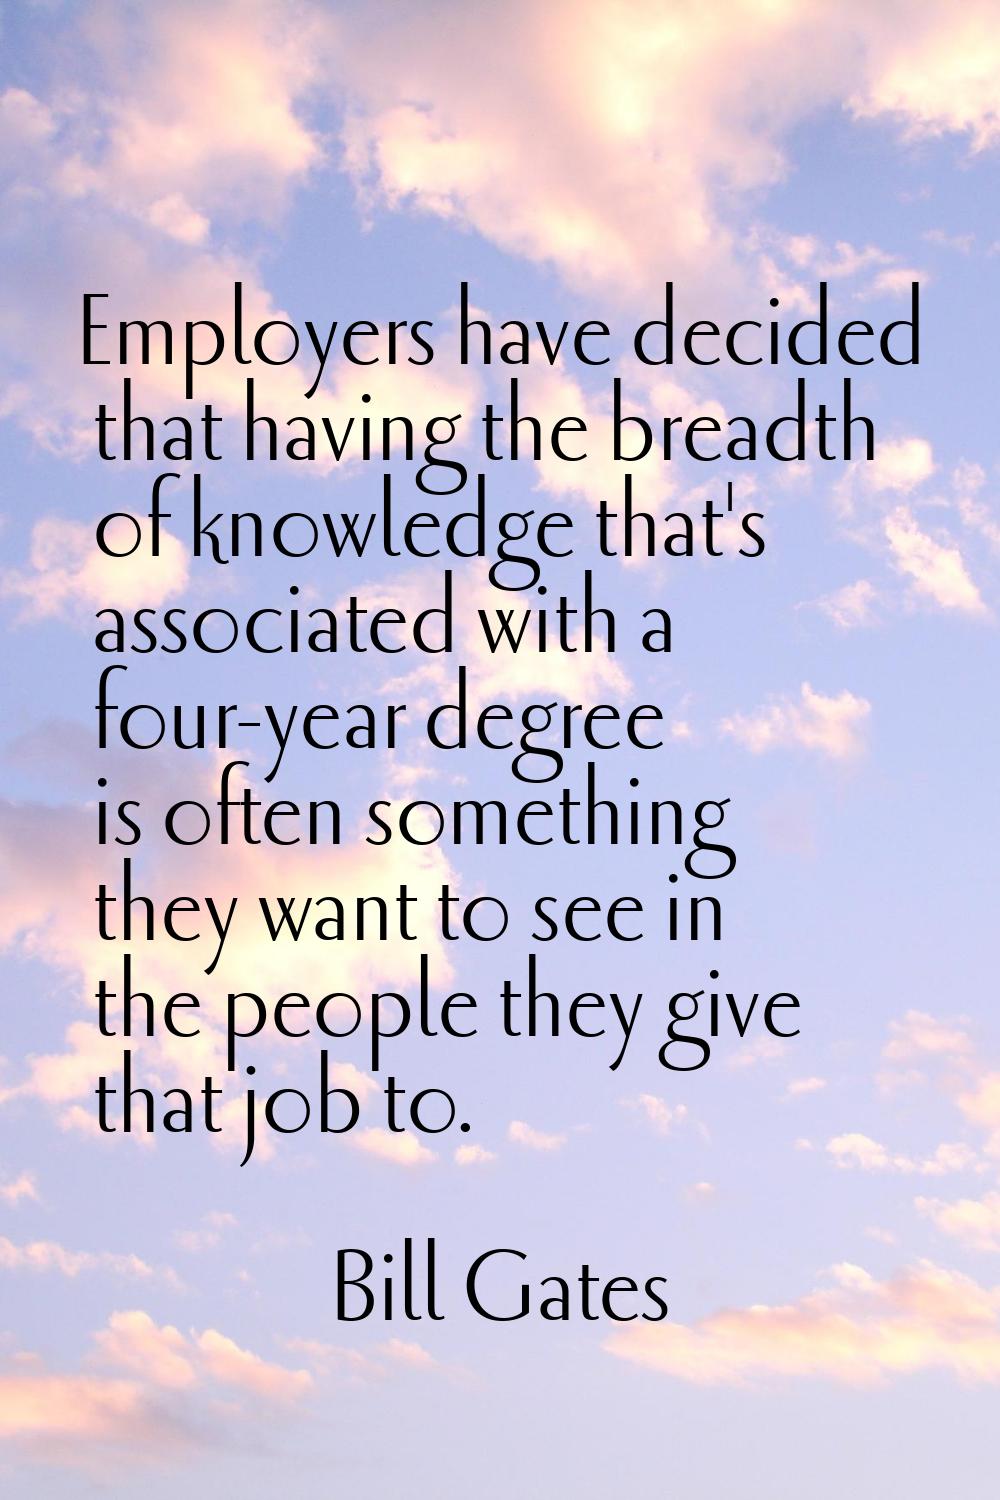 Employers have decided that having the breadth of knowledge that's associated with a four-year degr